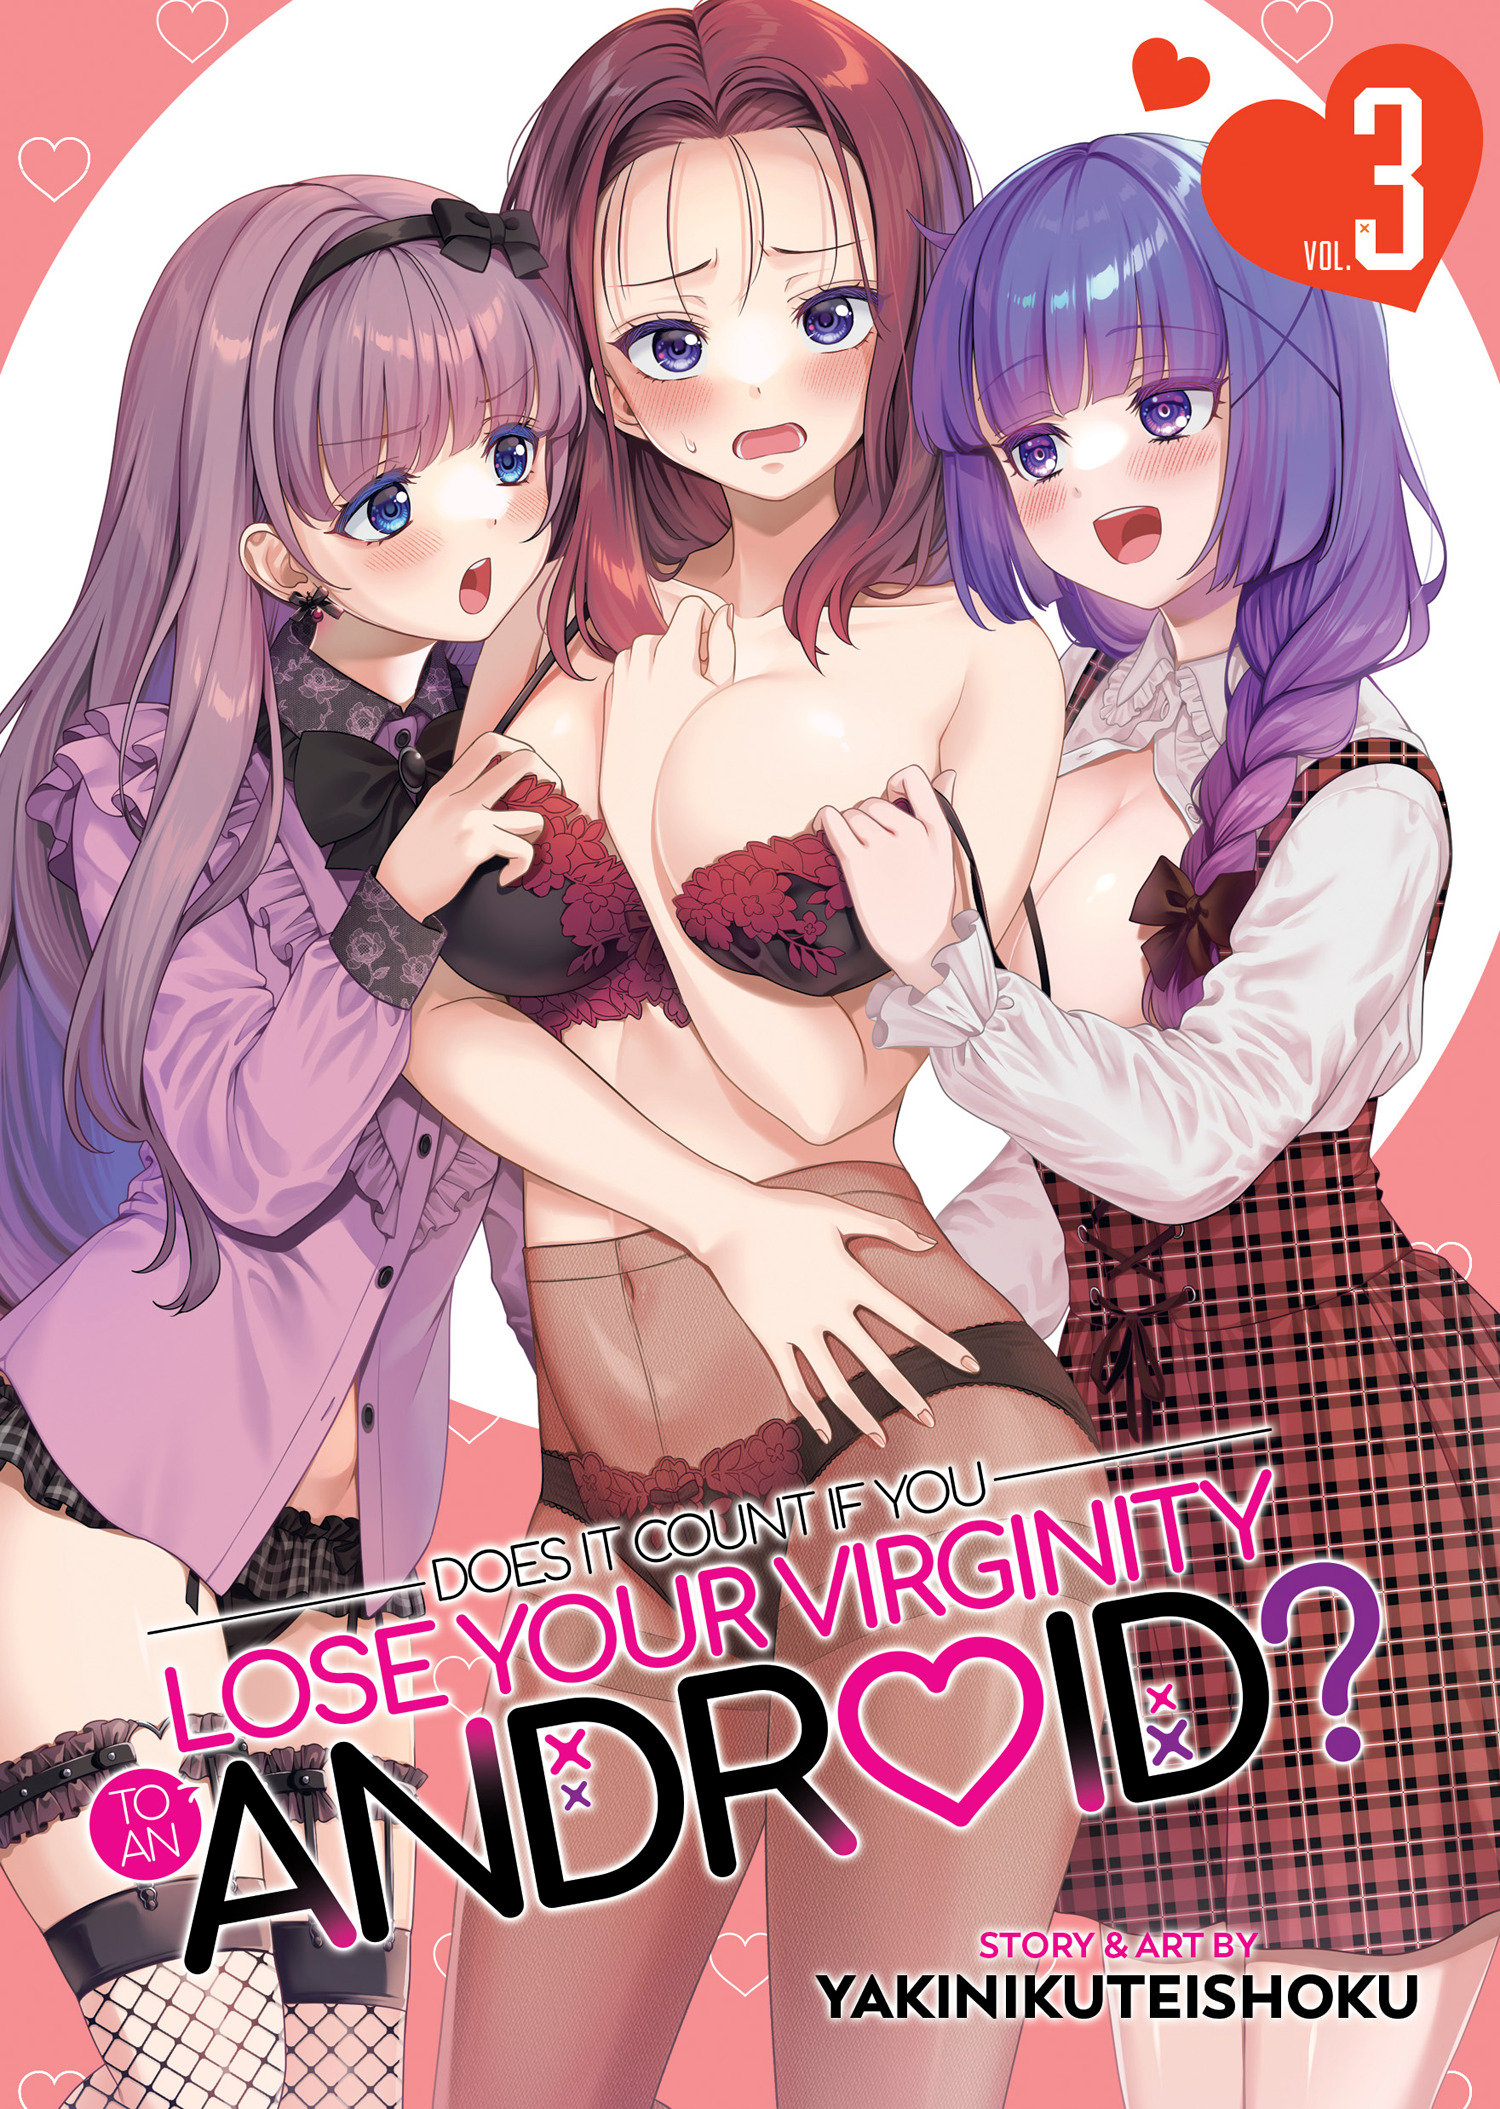 Does it Count if Lose Virginity to an Android? Manga Volume 3